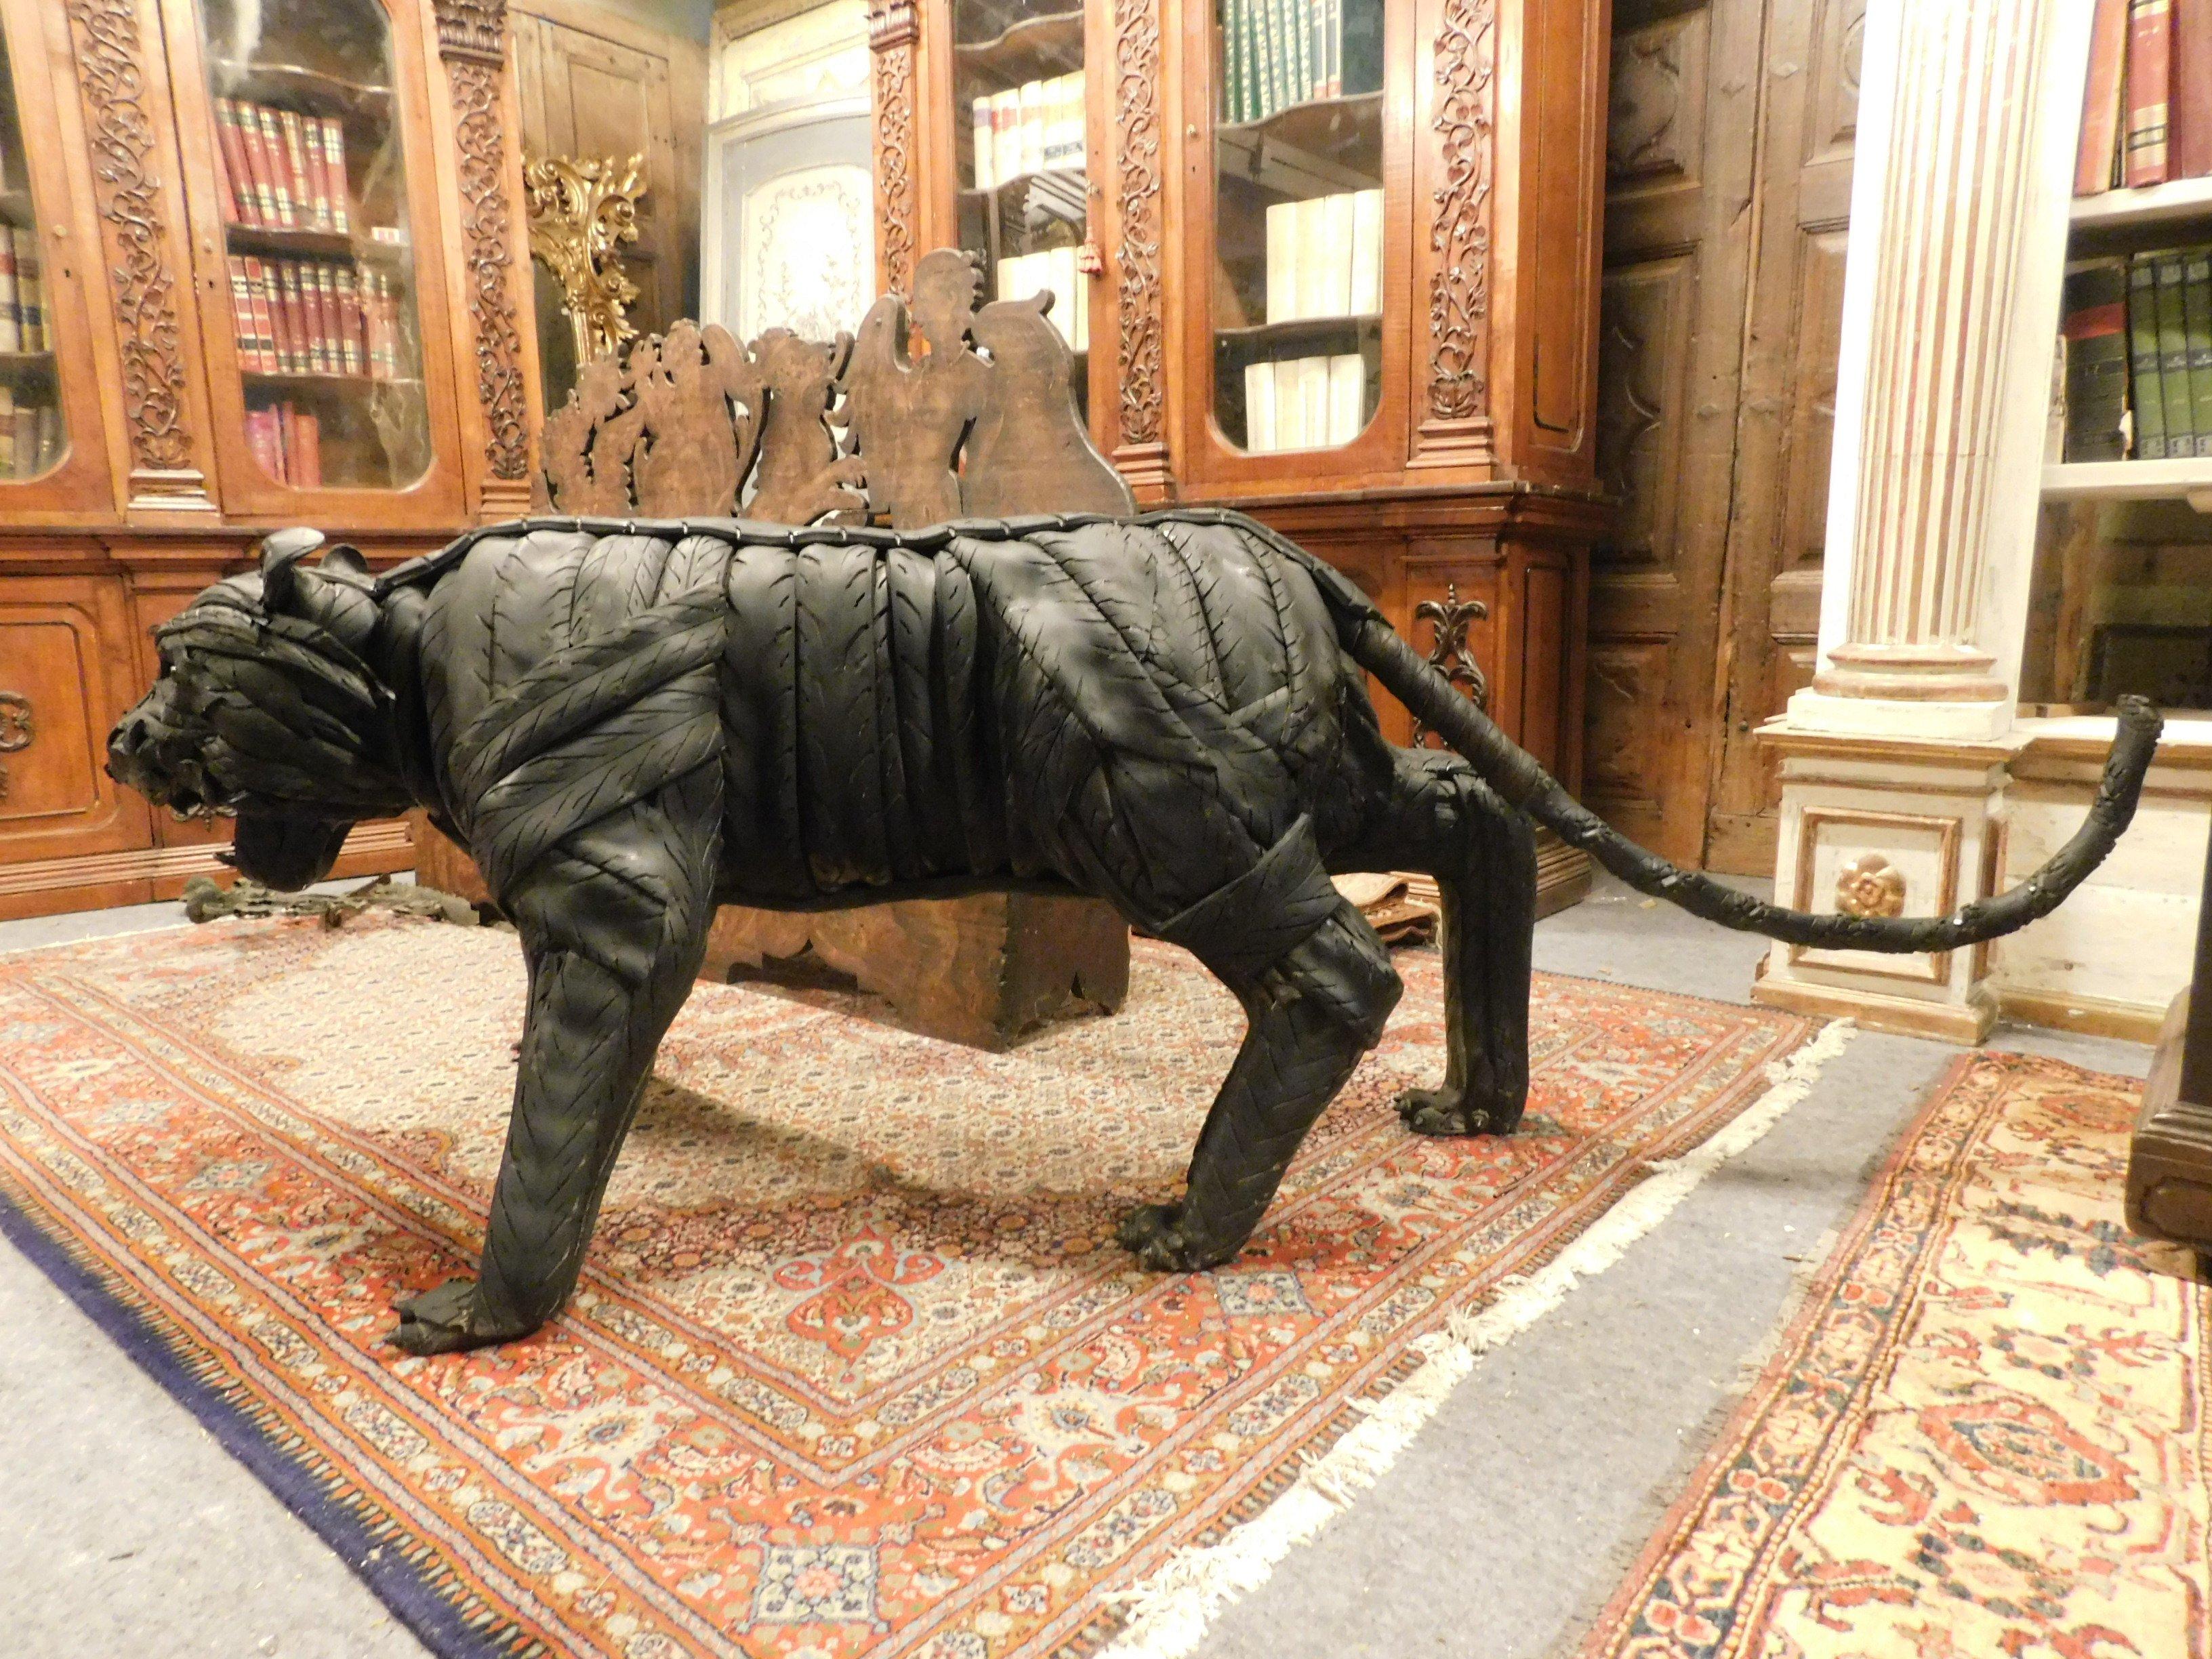 Black panther statue made in the first decades of the 1900s bda Italian artist with a lot of imagination, made from an iron armor covered with recovered rubber, very elegant and symbol of power, perfect in a luxury entrance or in an